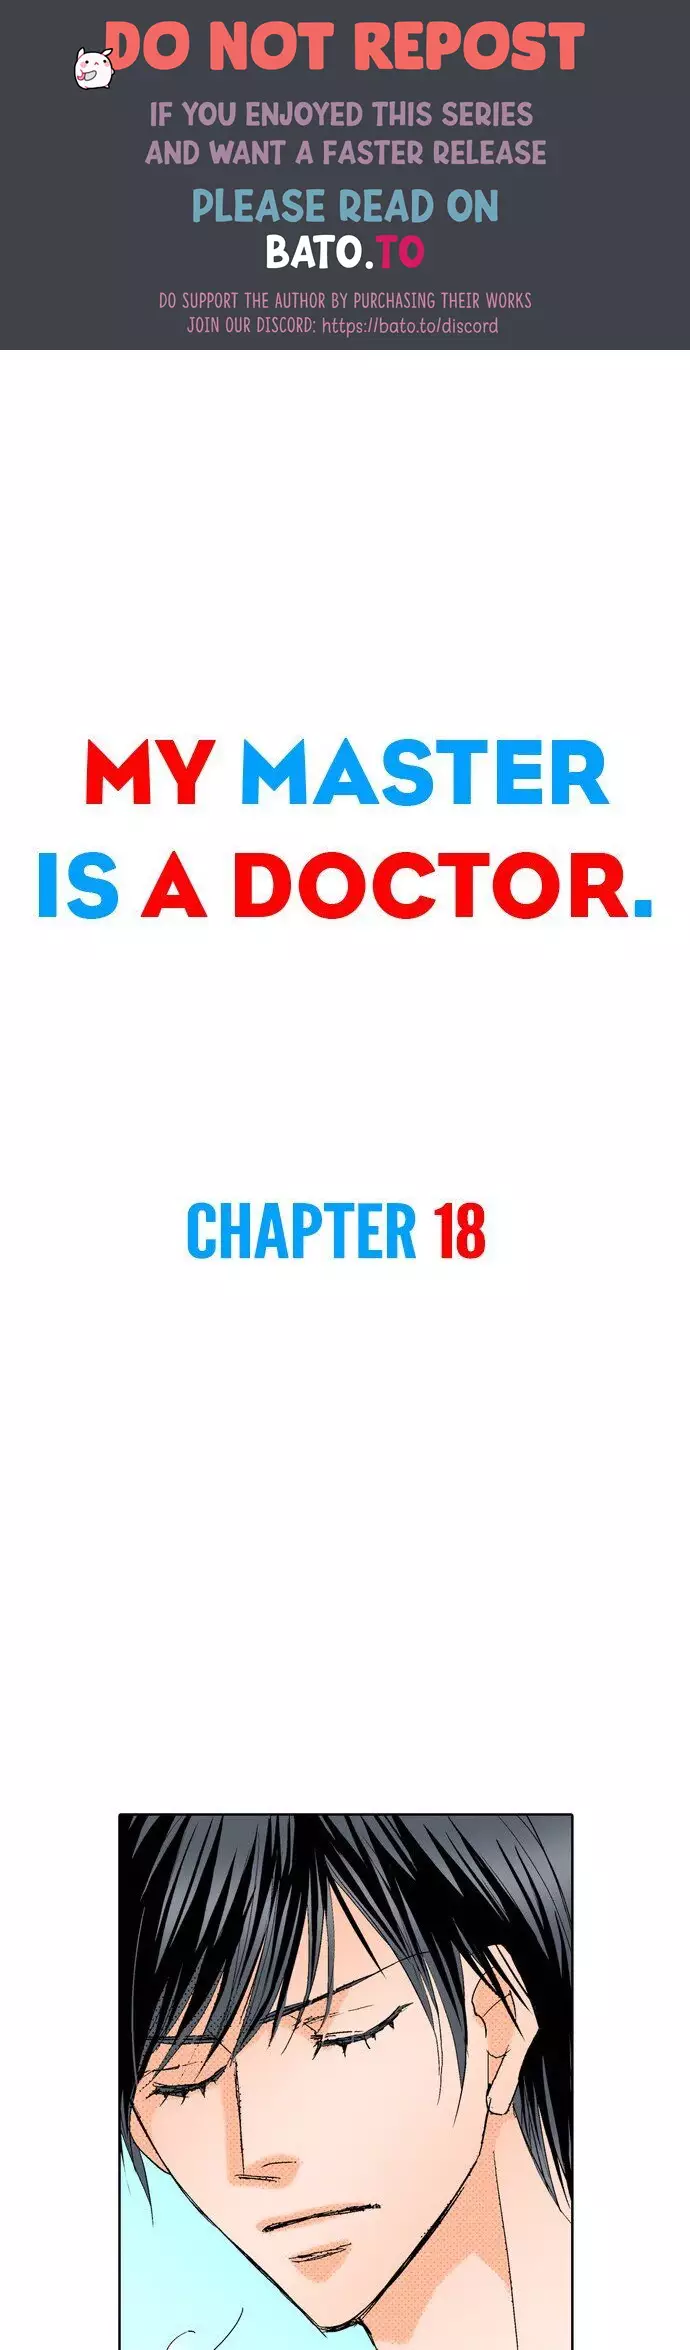 My Master Is A Doctor - 18 page 1-367bdc8a